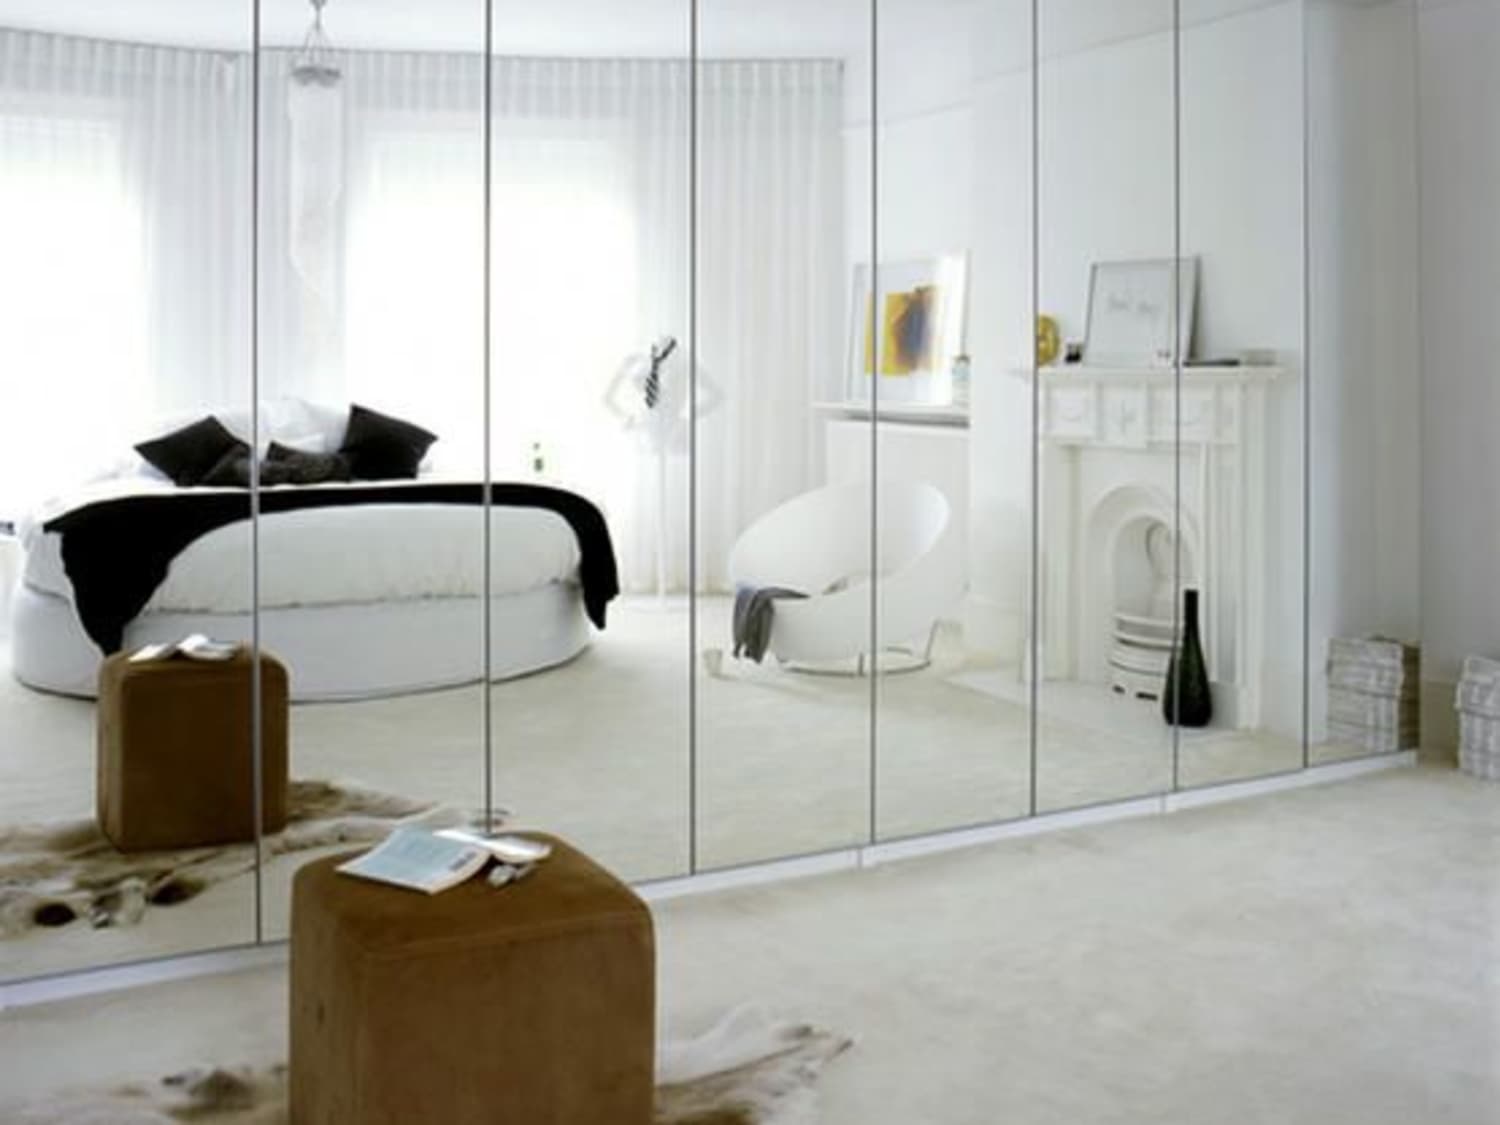 Plagued With Dated Mirrored Walls 5 Design Ideas To Make